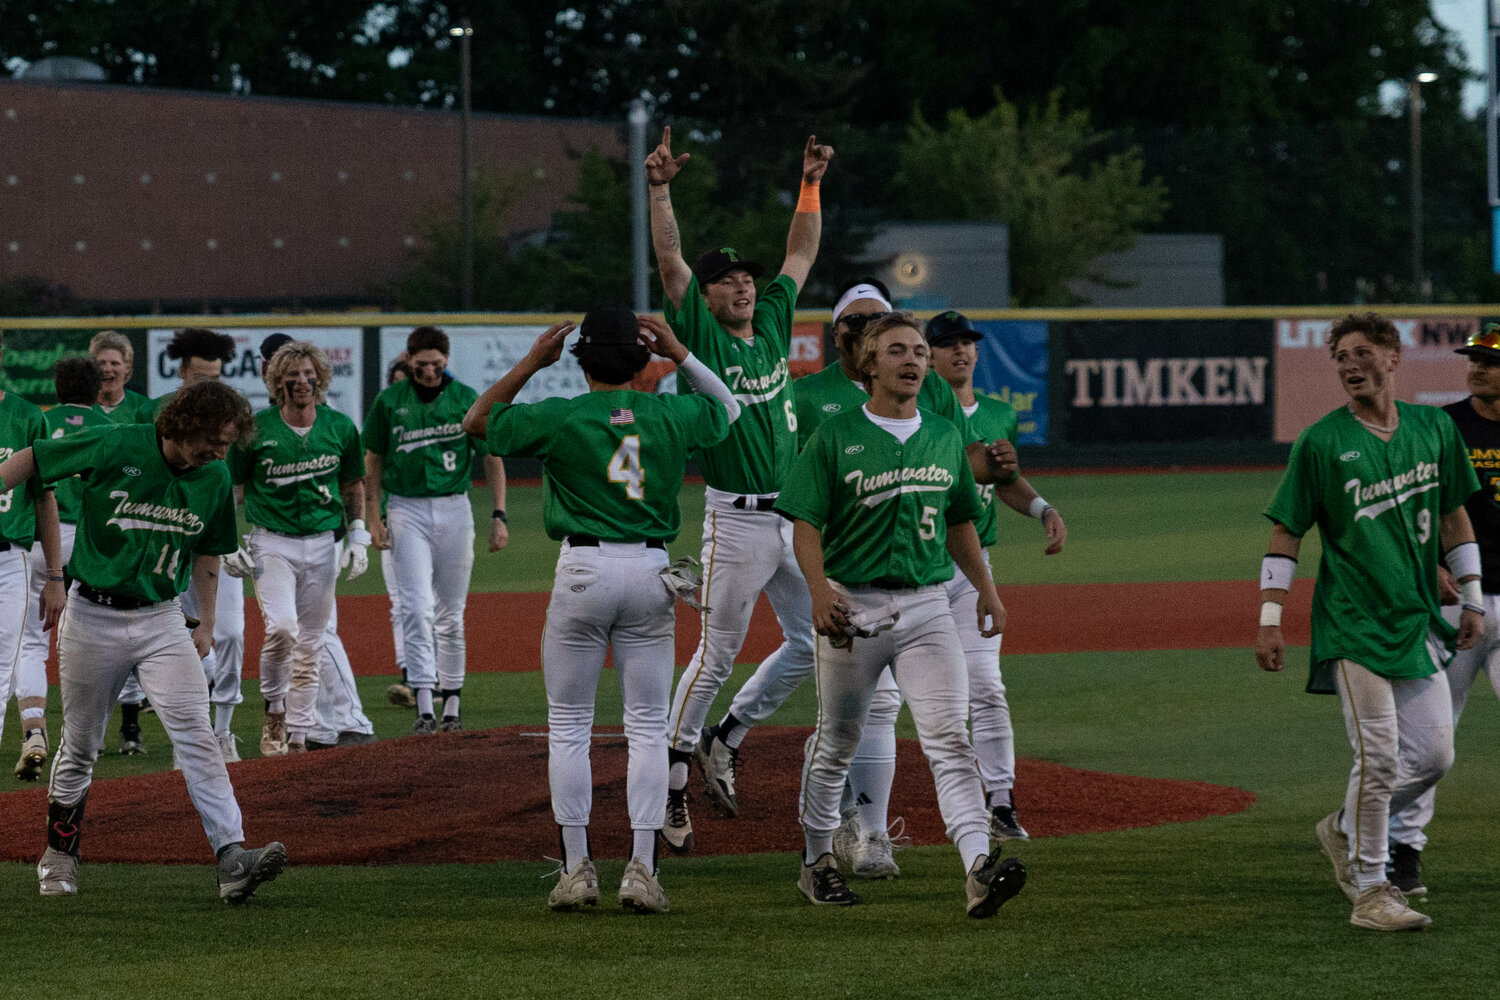 The Tumwater baseball team yells in celebration after a 2-1 win in the 2A state title against Lynden at Joe Martin Stadium in Bellingham May 27.